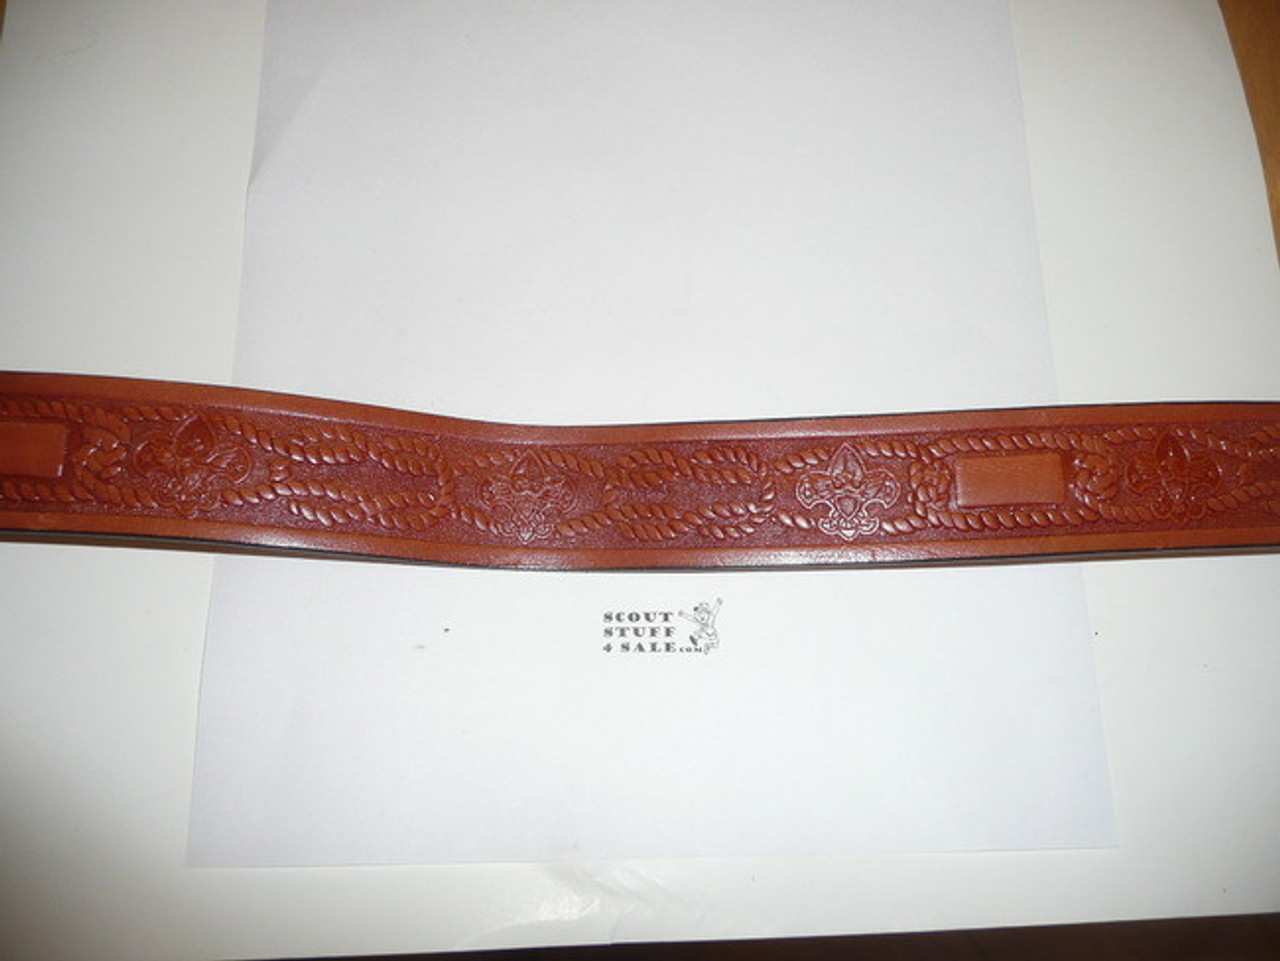 Official Boy Scout Tooled Leather Belt, 32" waist, lite use